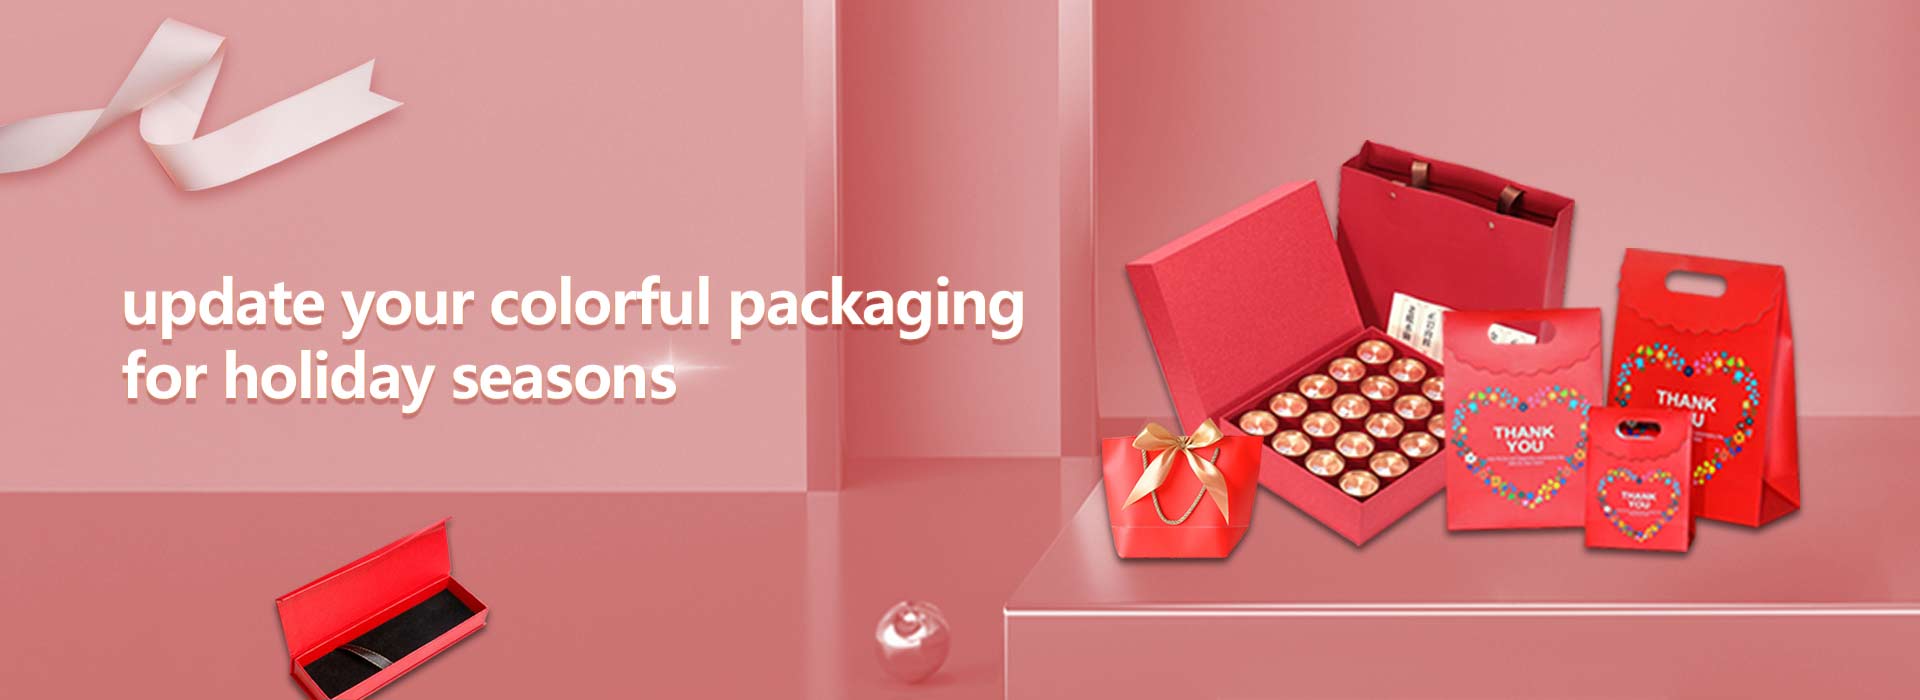 Jewelry gift boxes supplier & manufacturer